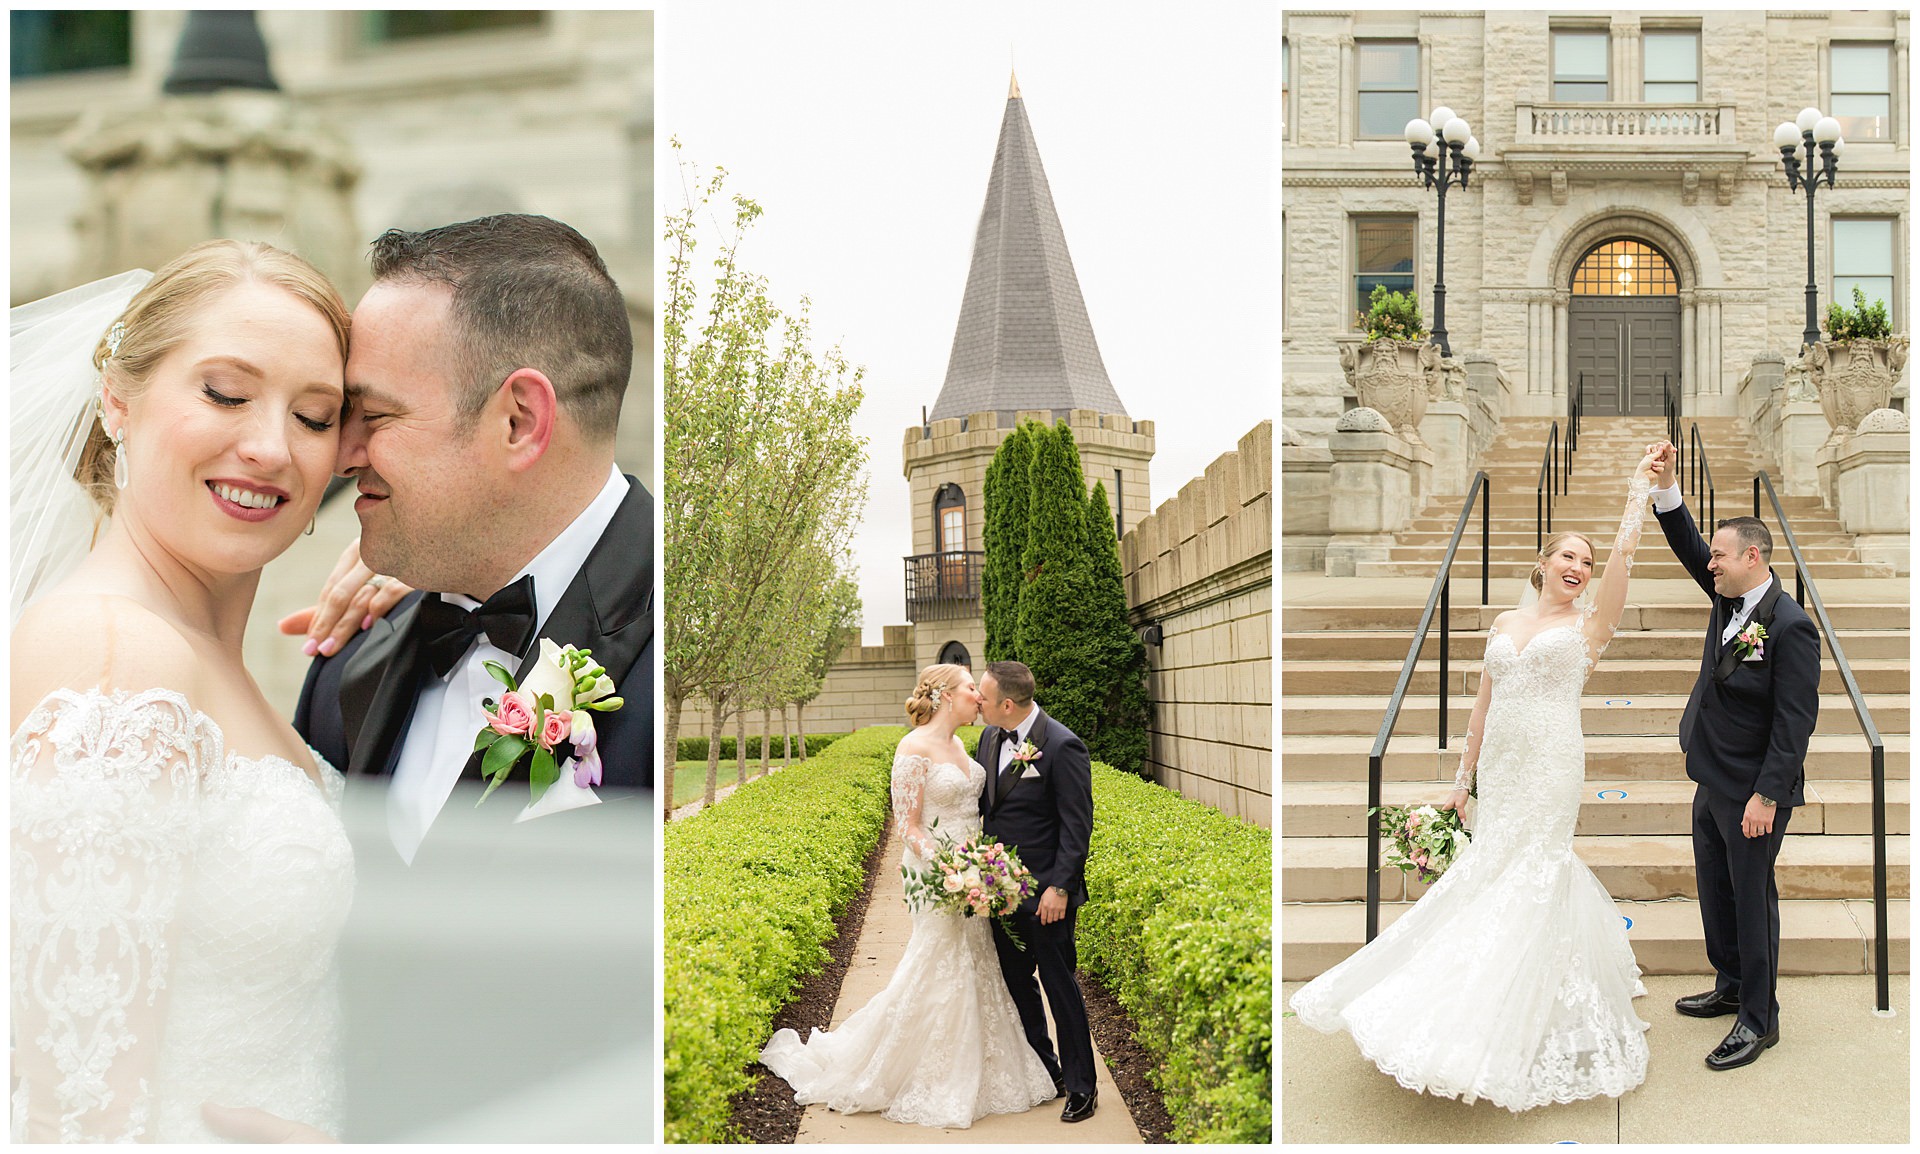 Wedding Photos at the Kentucky Castle and Limestone Hall